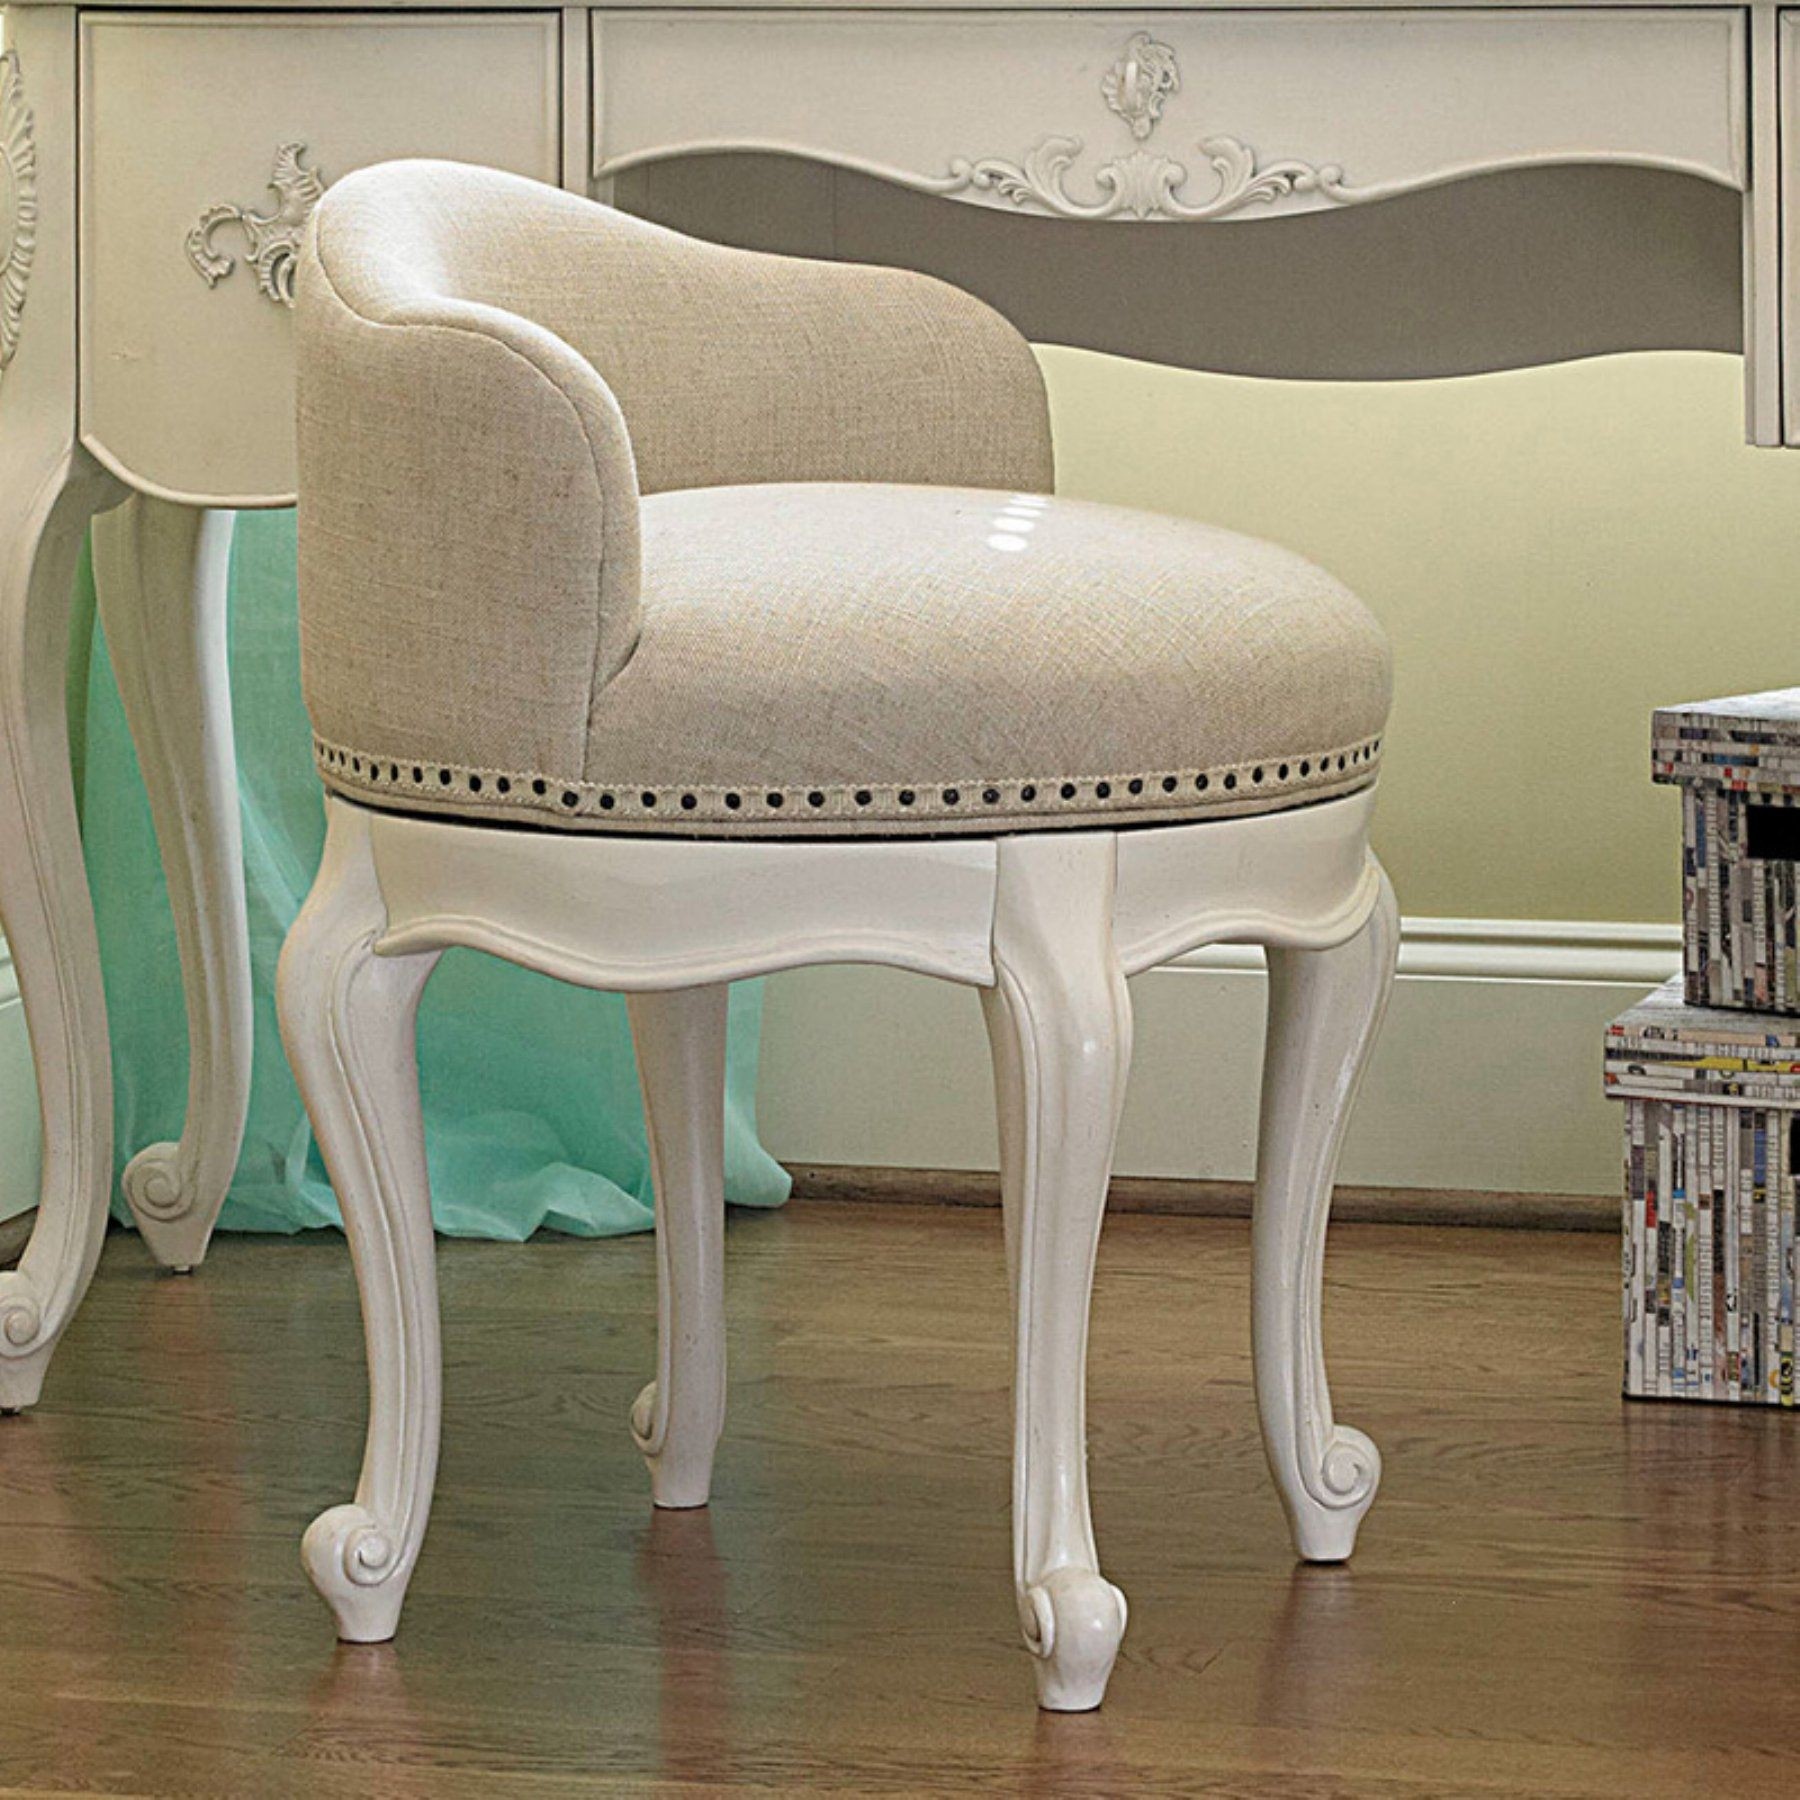 Chic Vanity Stools For Makeup And Grooming